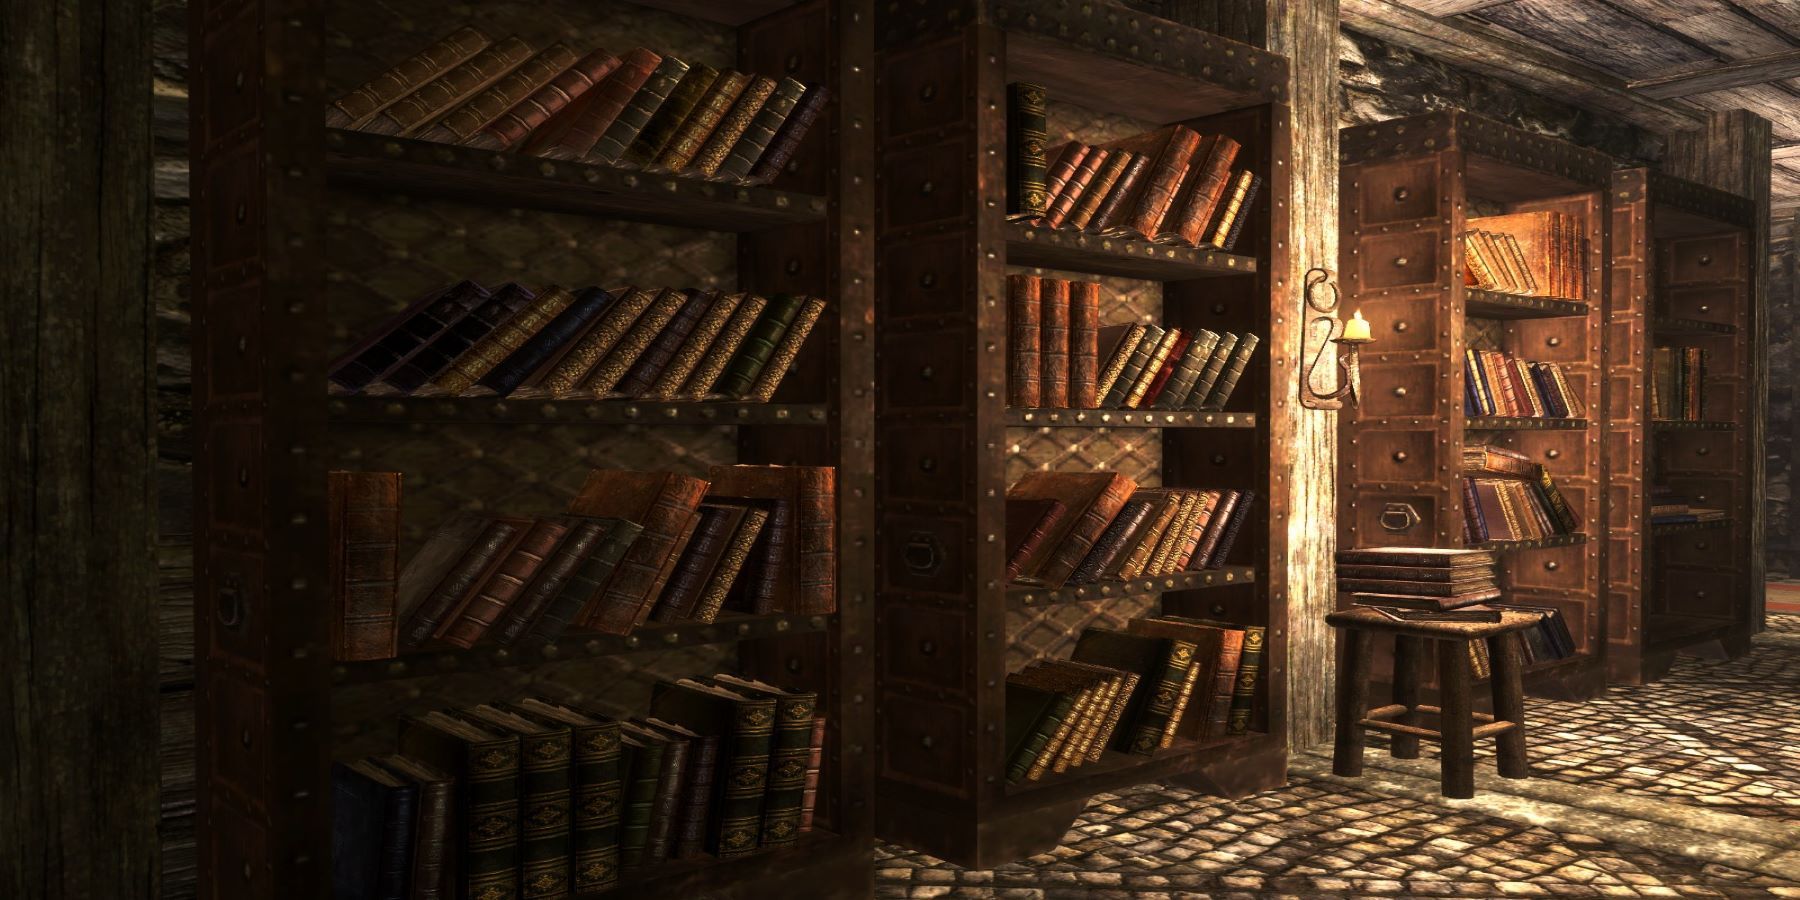 Skyrim Video Shows What Happens When Players Dump a Ton of Books in the Same Spot